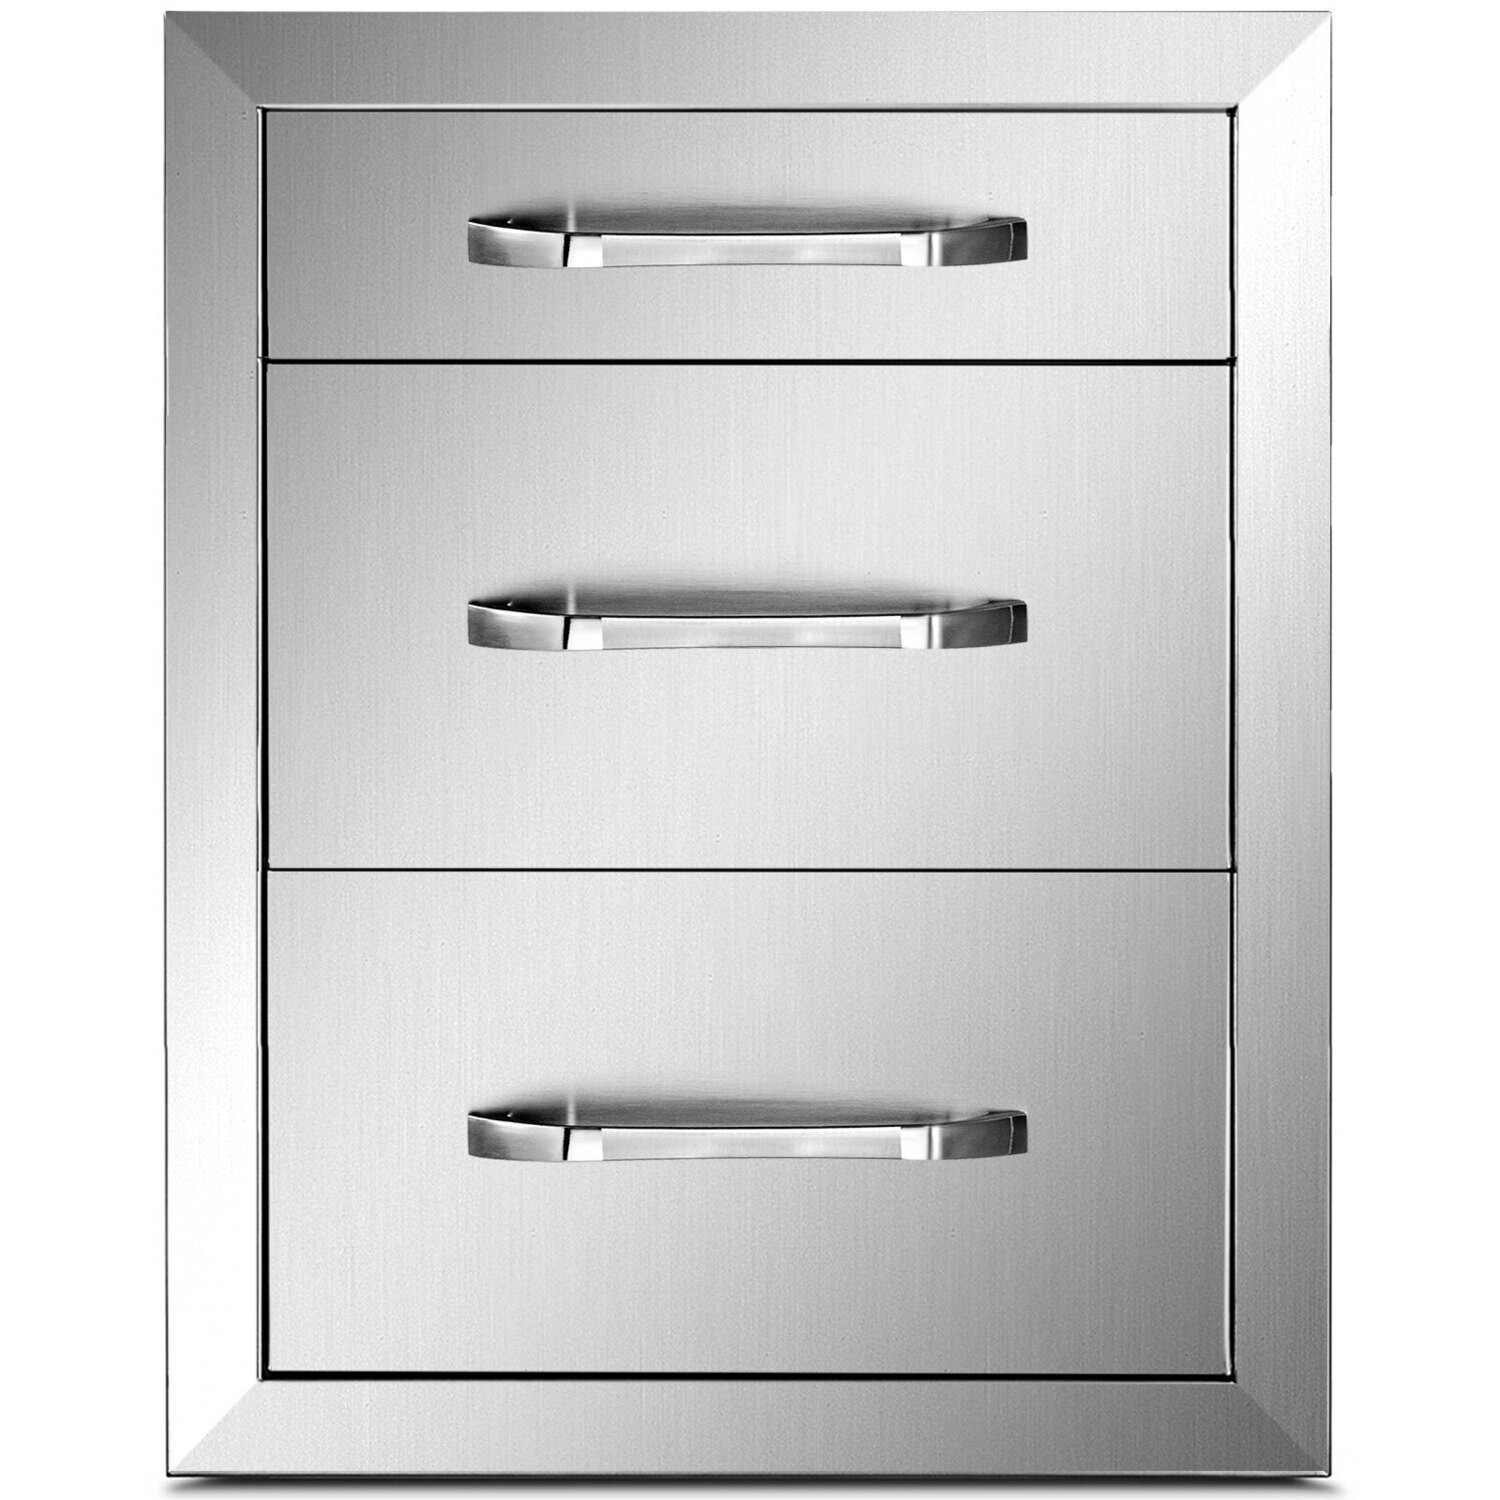 35*58cm Stainless Steel 3 Drawer Chest with Handle BBQ Storage Cabinet